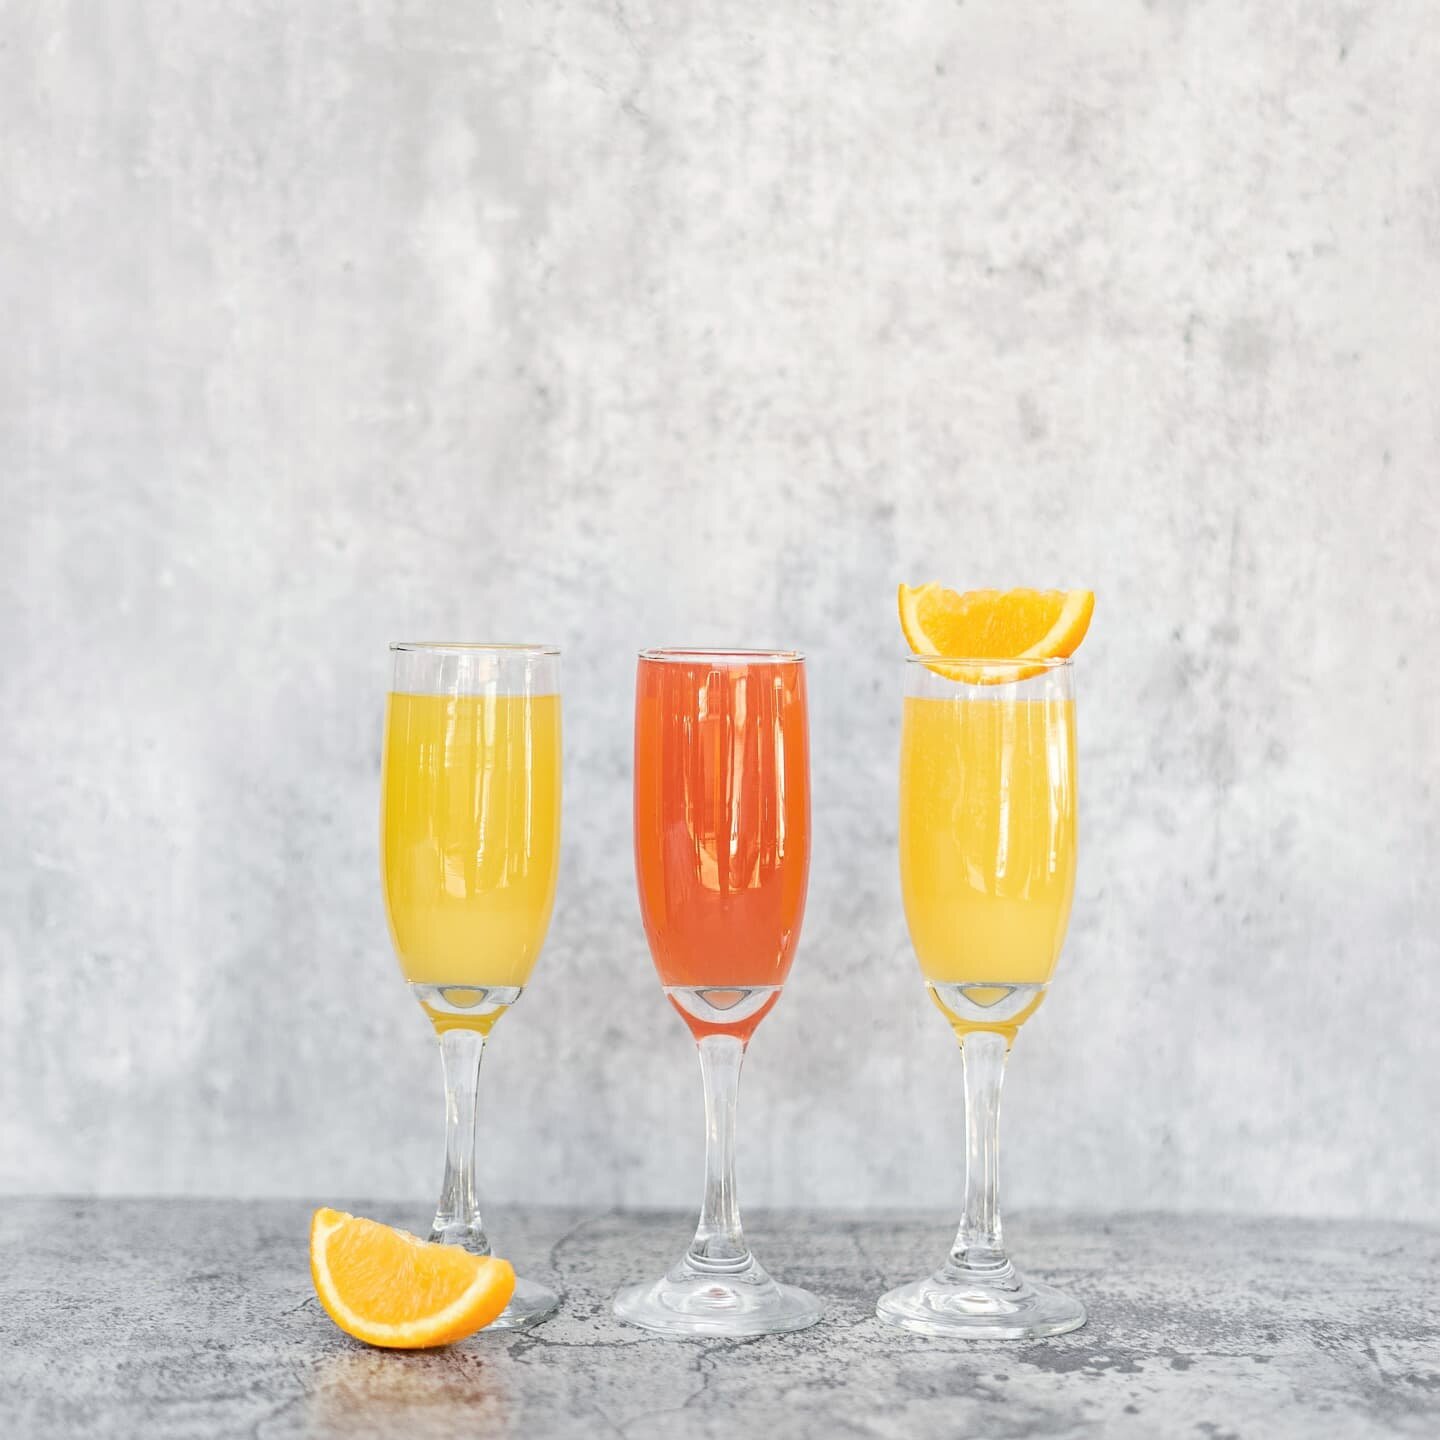 Did someone say mimosas? YOU HEARD IT. They are here for the weekend (Saturday and Sunday)! 

Serving with Orange Juice, Grapefruit, and Pineapple. Enjoy it fresh with your breakfast this weekend 🍍🥂🍊

#journeydowntown #journeydowntownmenu #weekend